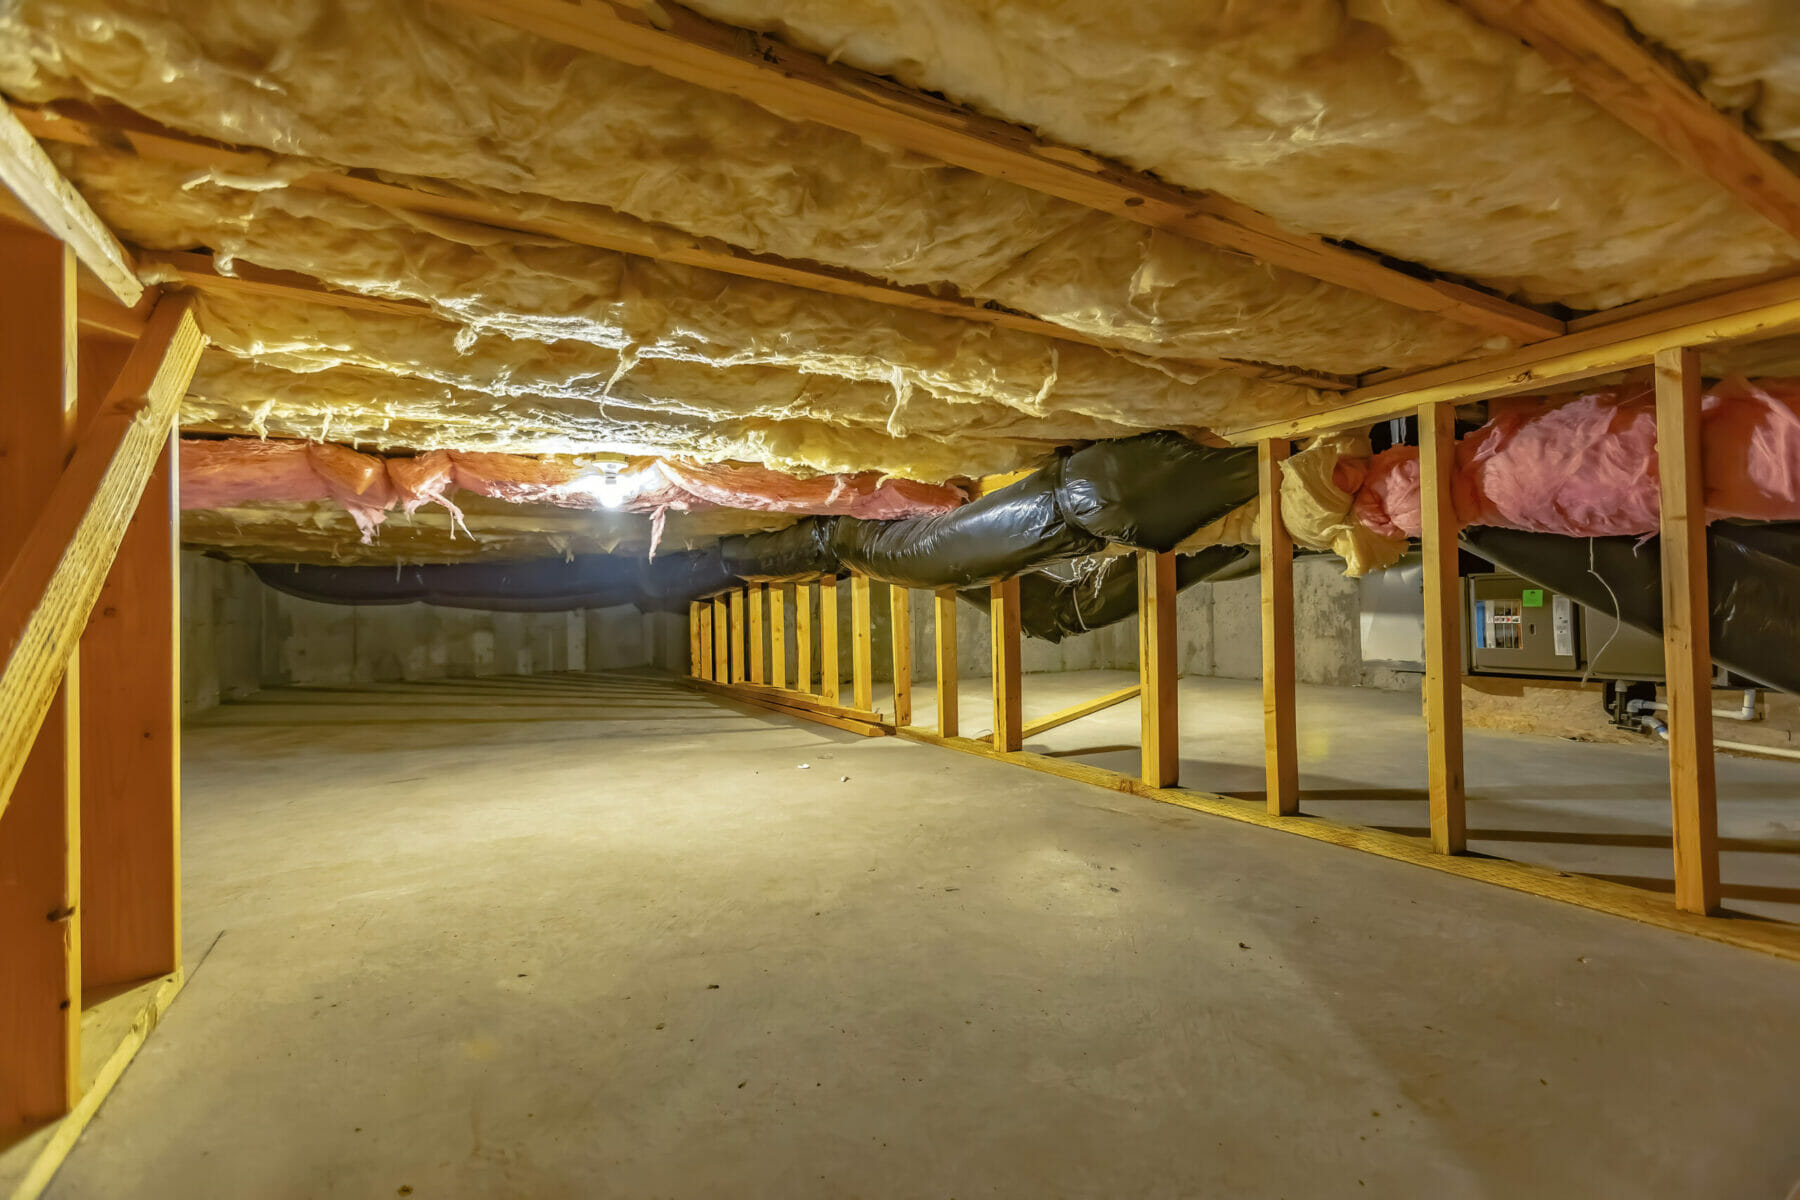 crawl space with upper floor insulation and wooden support beams